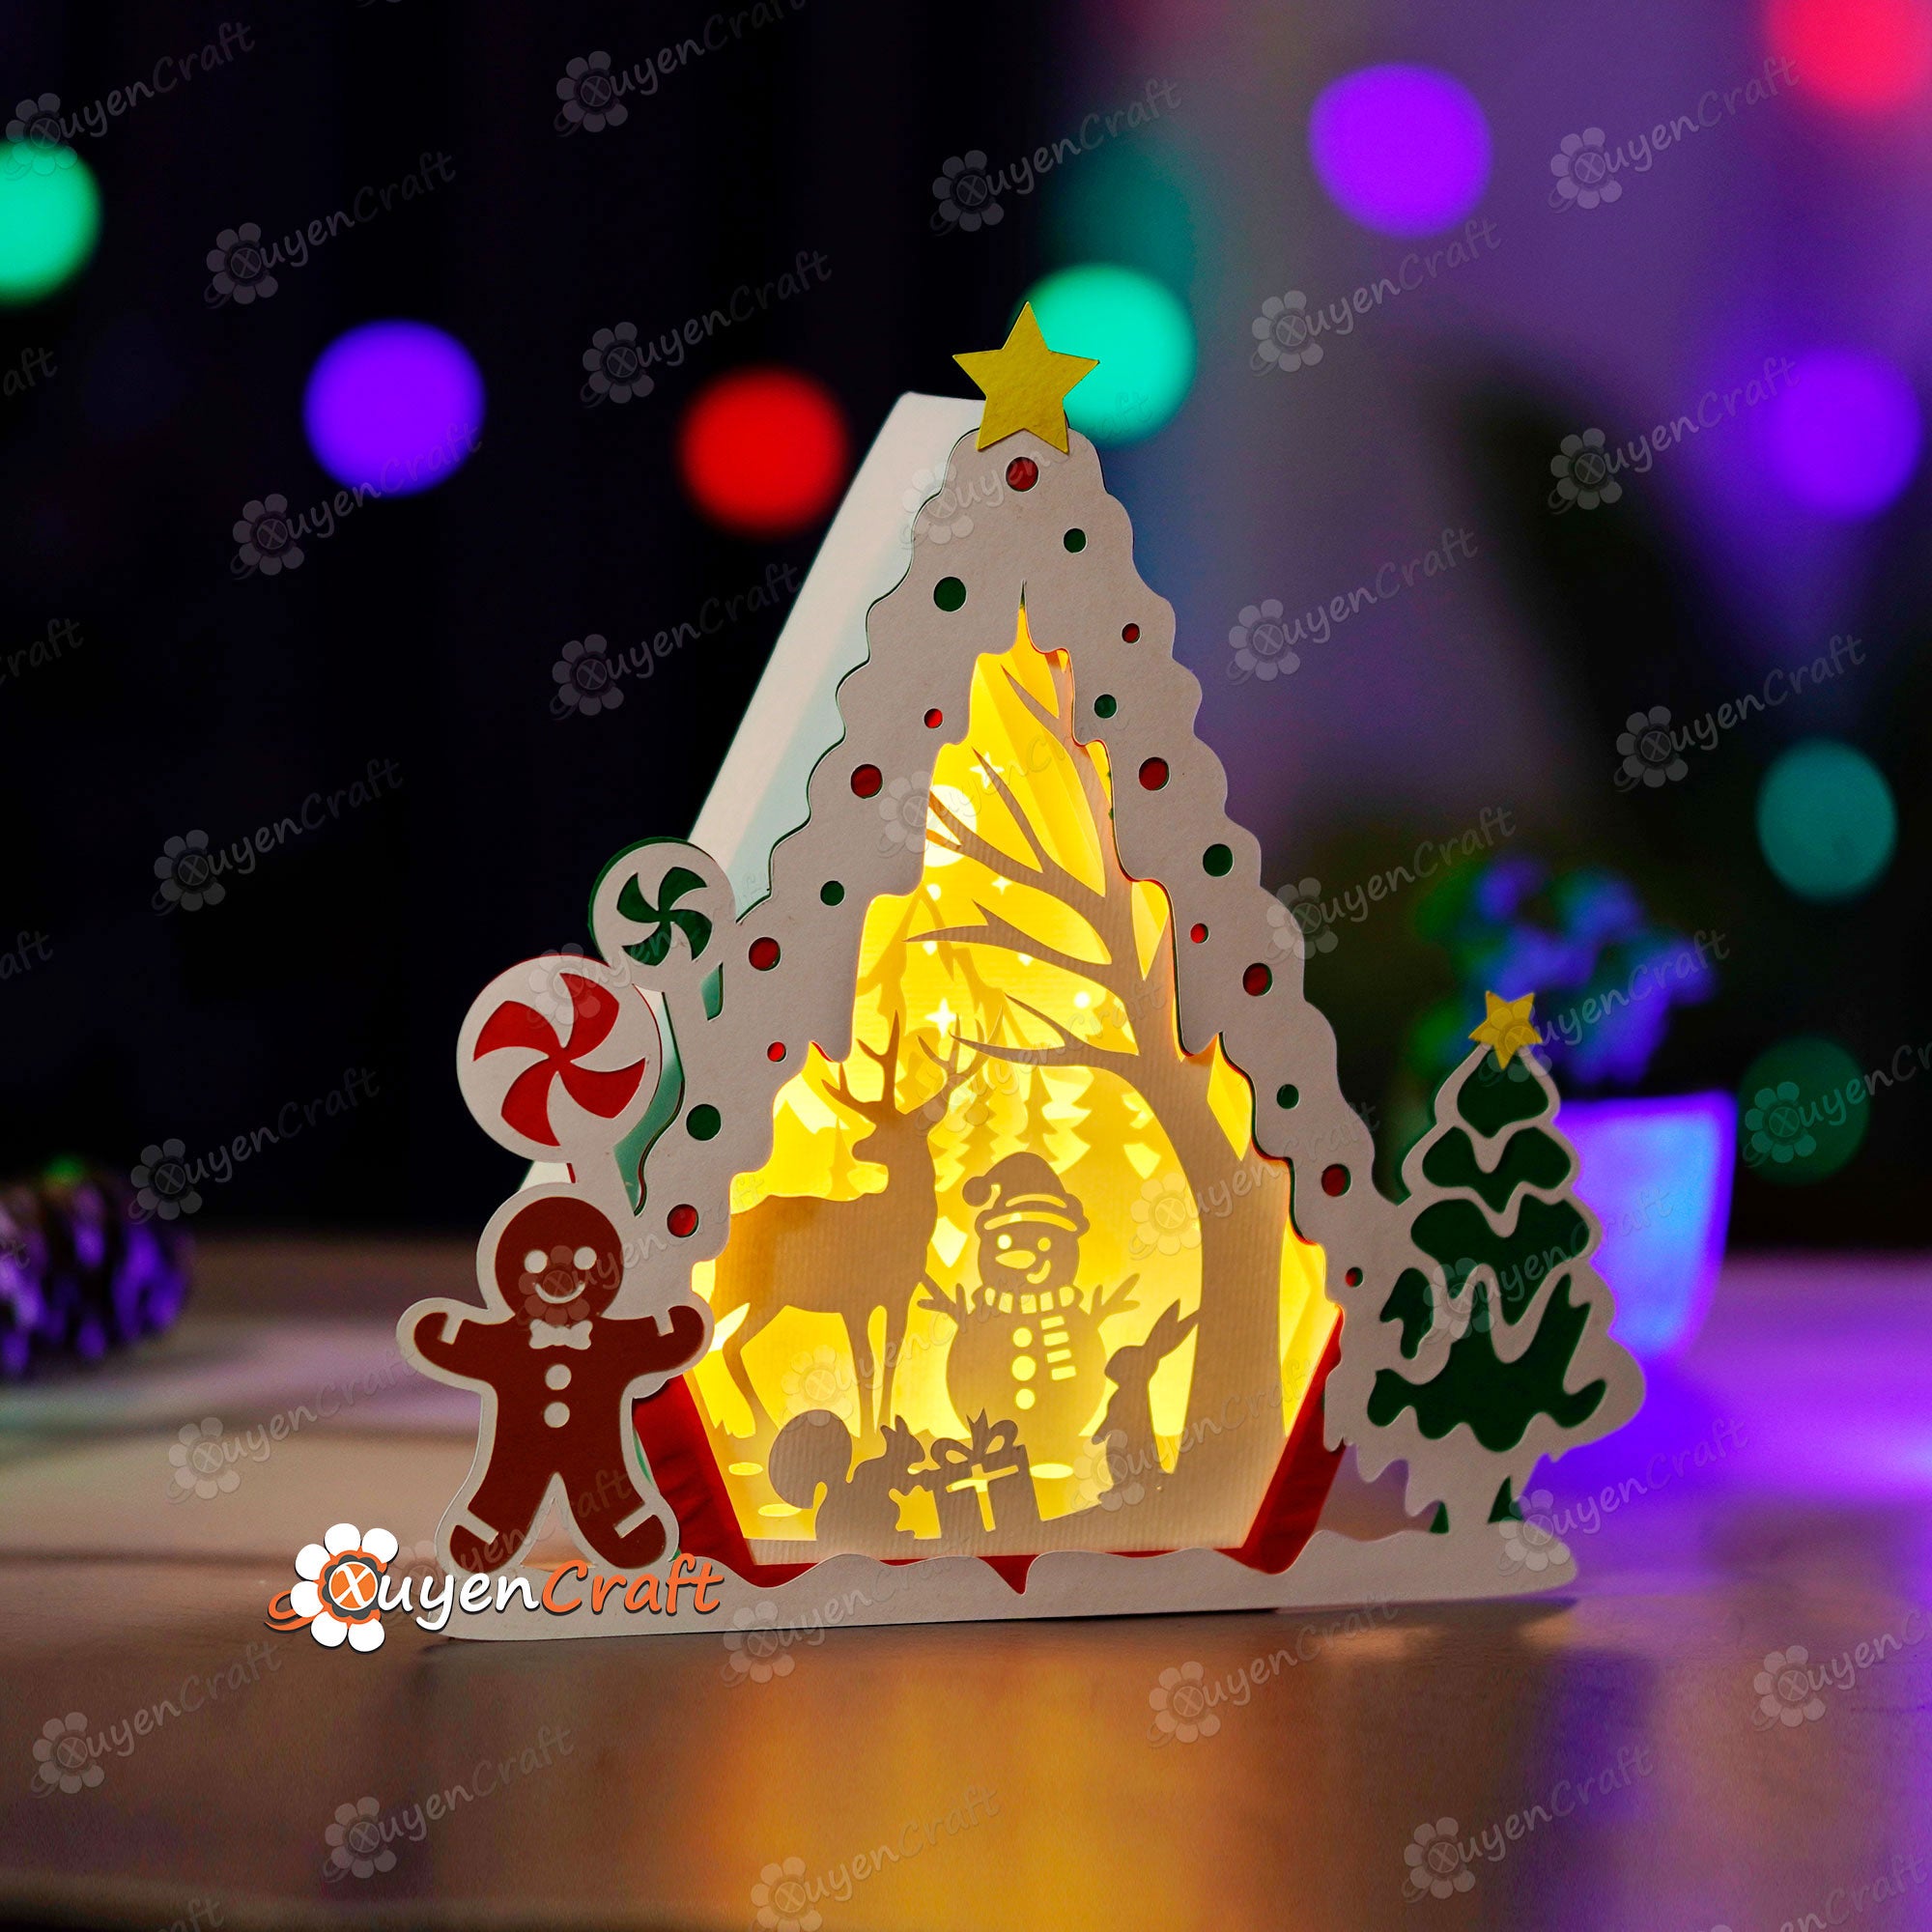 Pack 3 Gingerbread House Shadow Box SVG Light Box - Candy House Christmas Lantern - Paper Cut Template For Christmas - Snowman House svg